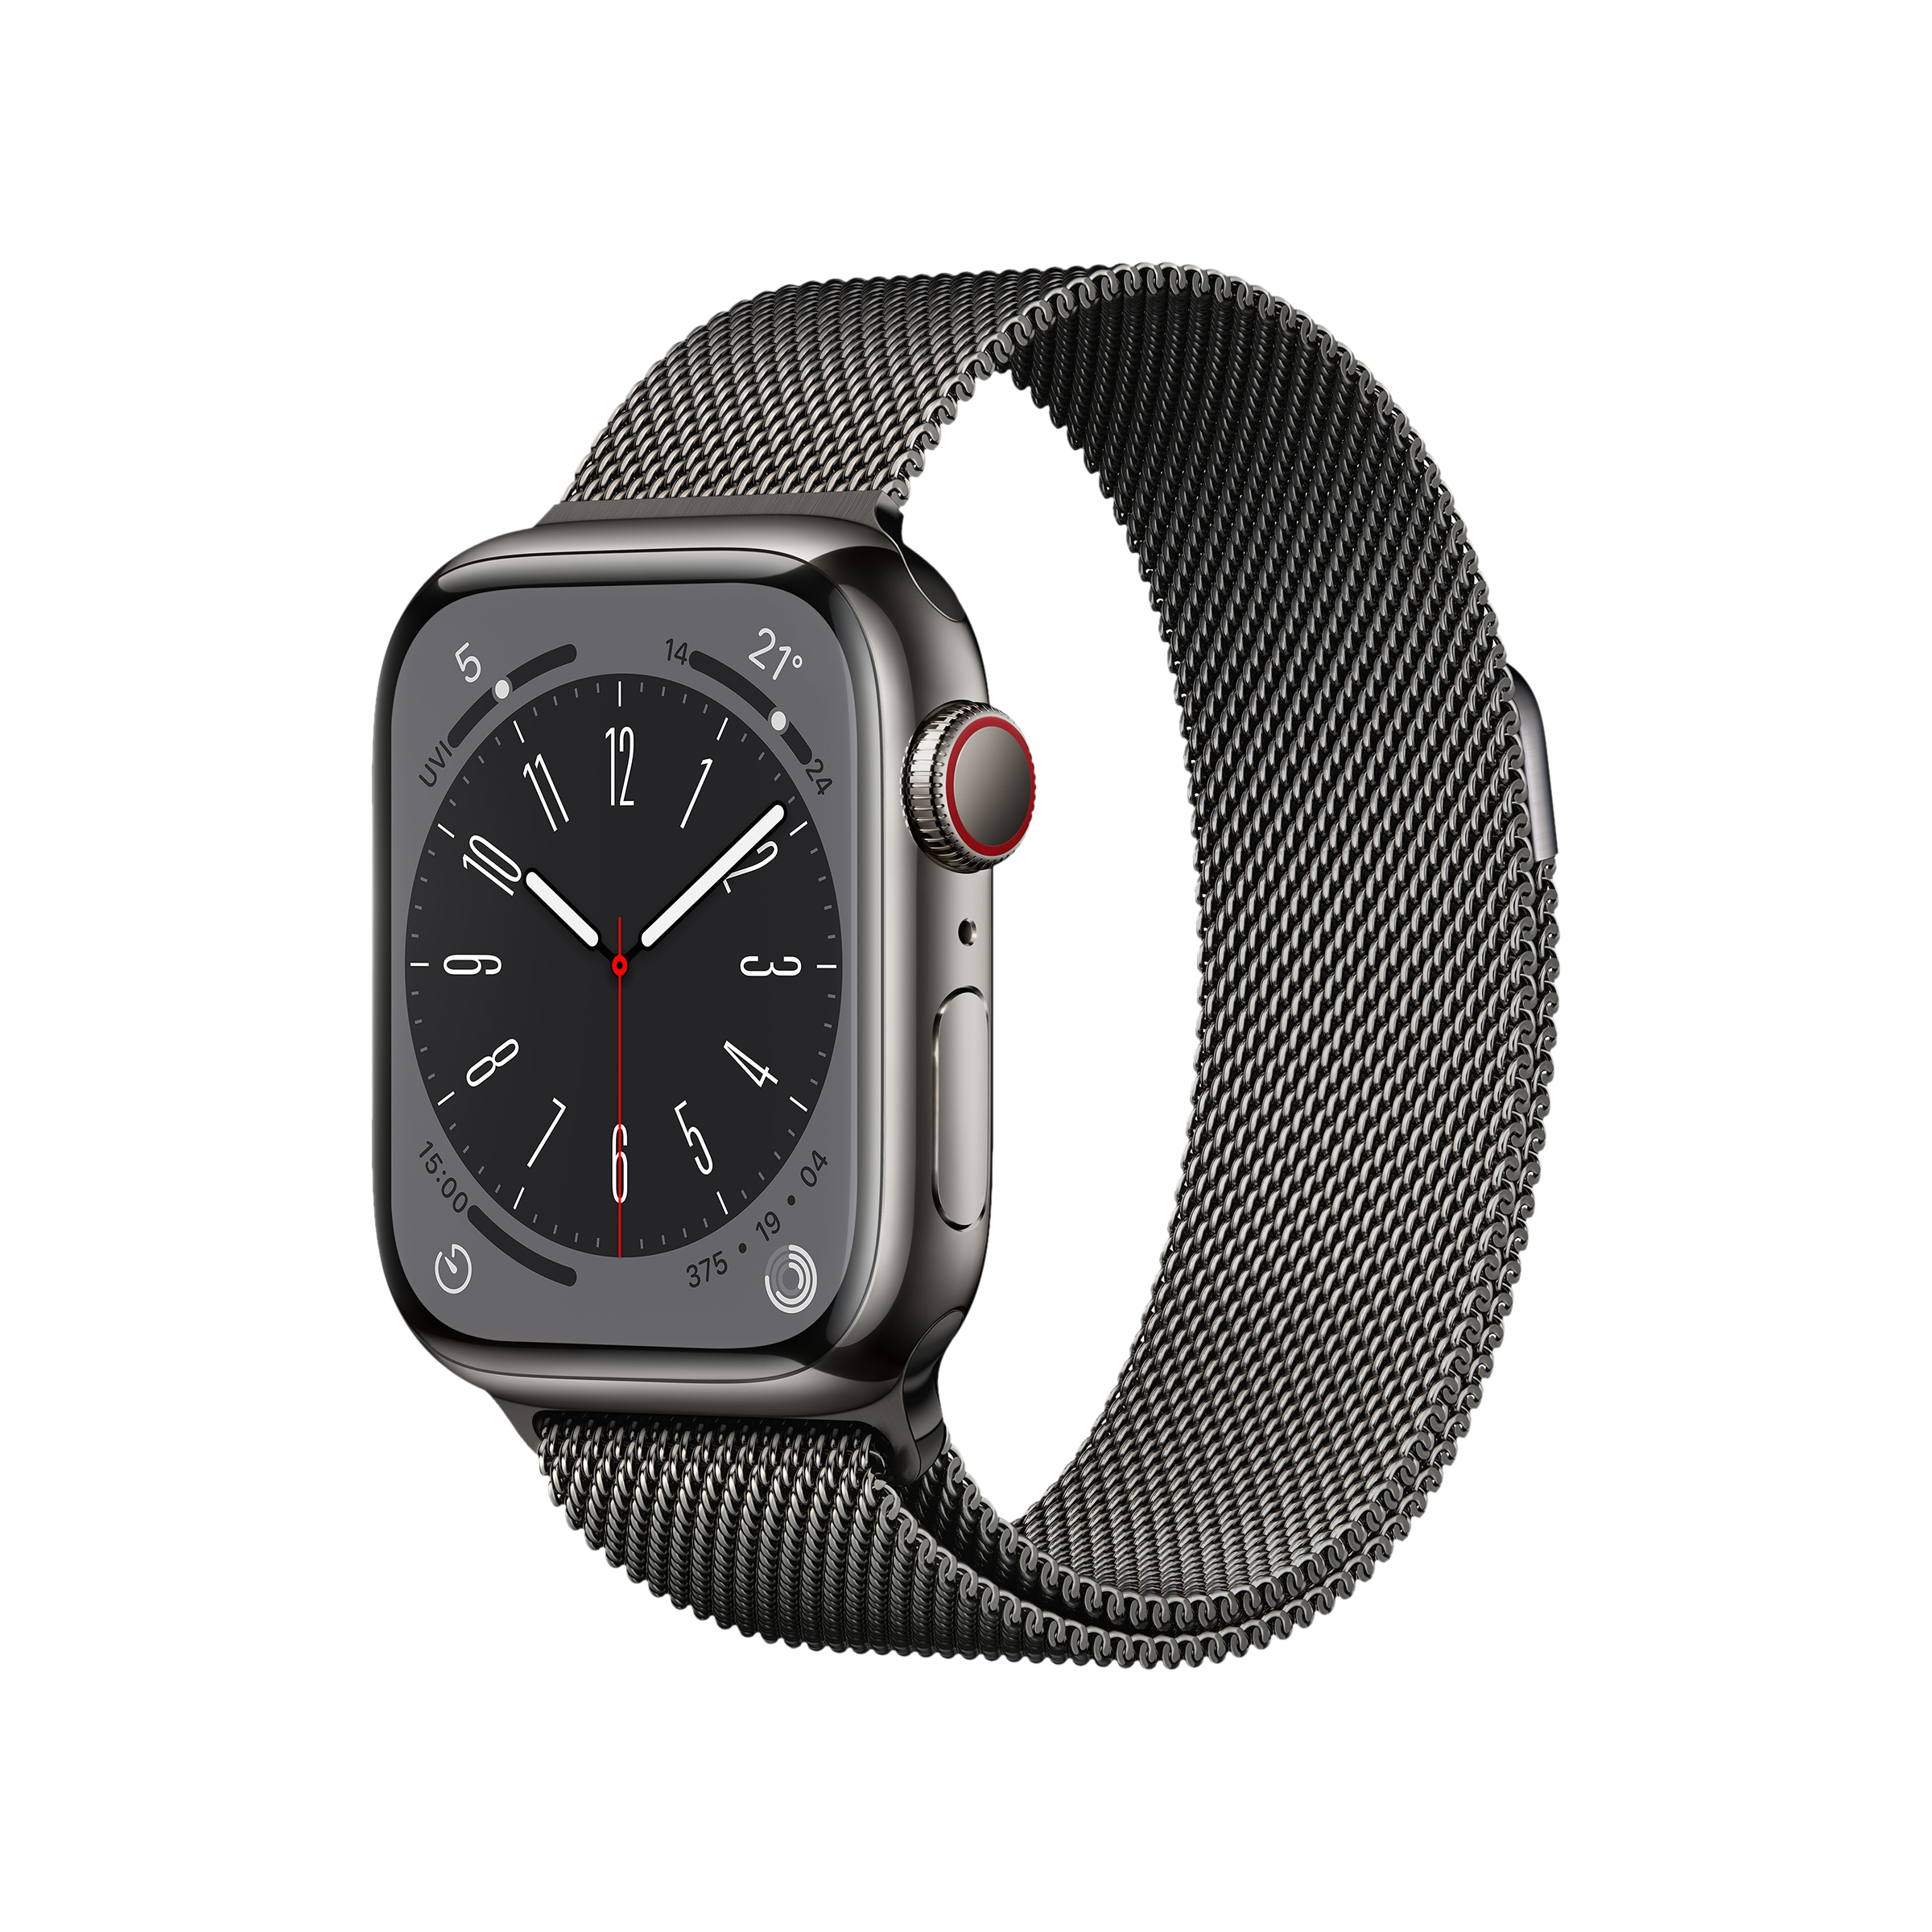 Apple Watch Ultra review – perfect for more than just fitness buffs |  CrackBerry